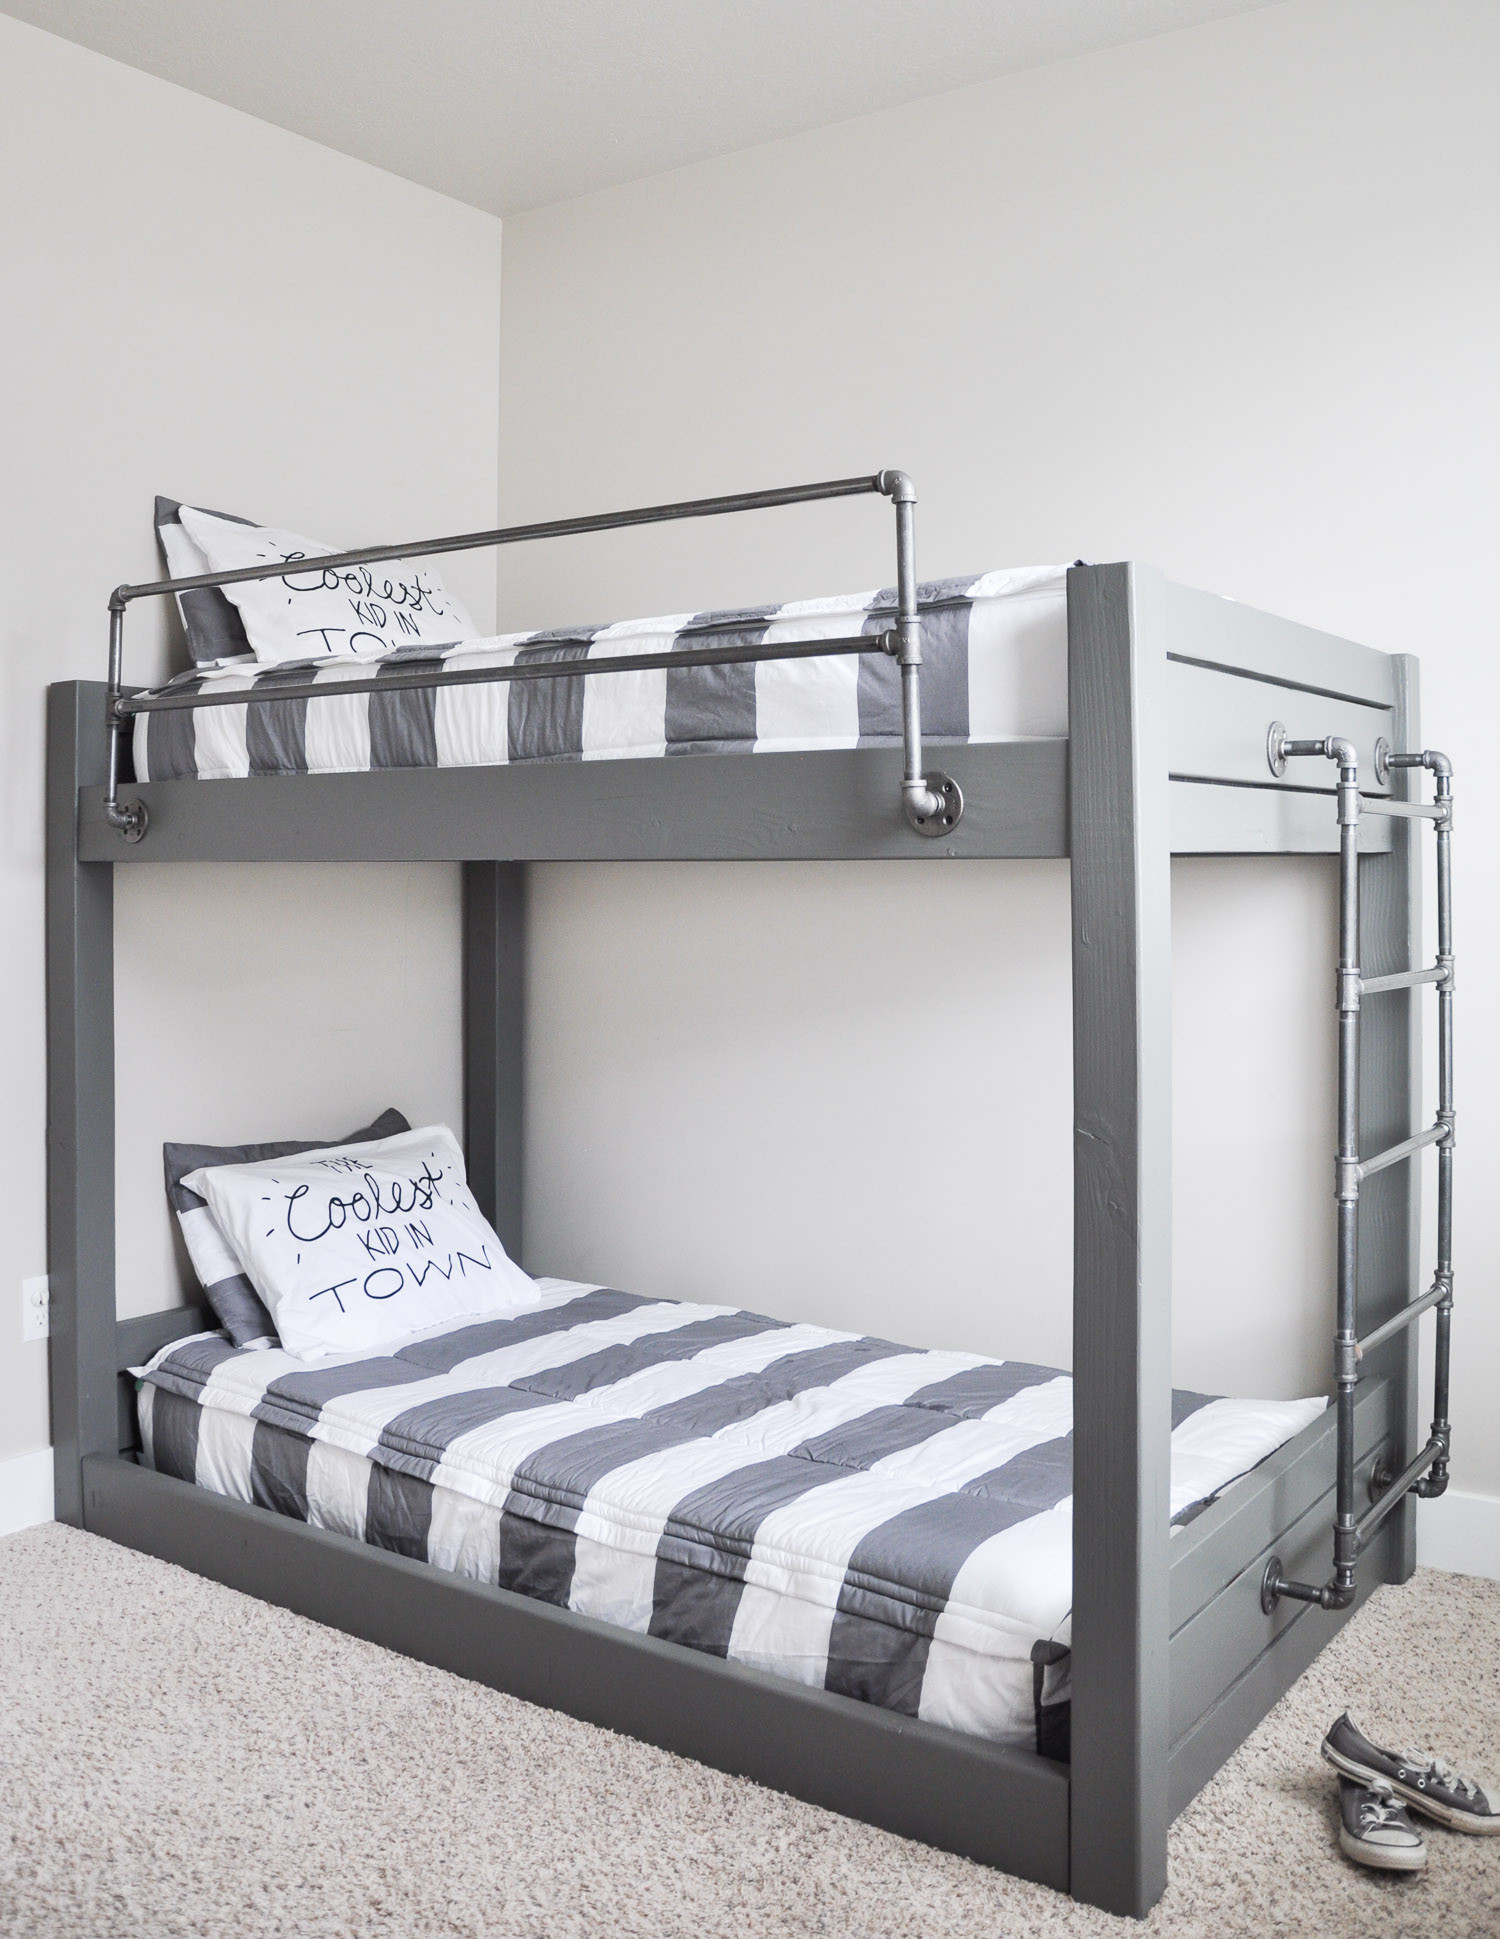 DIY Bunk Beds Plans
 35 Free DIY Bunk Bed Plans to Save Your Bedroom Space